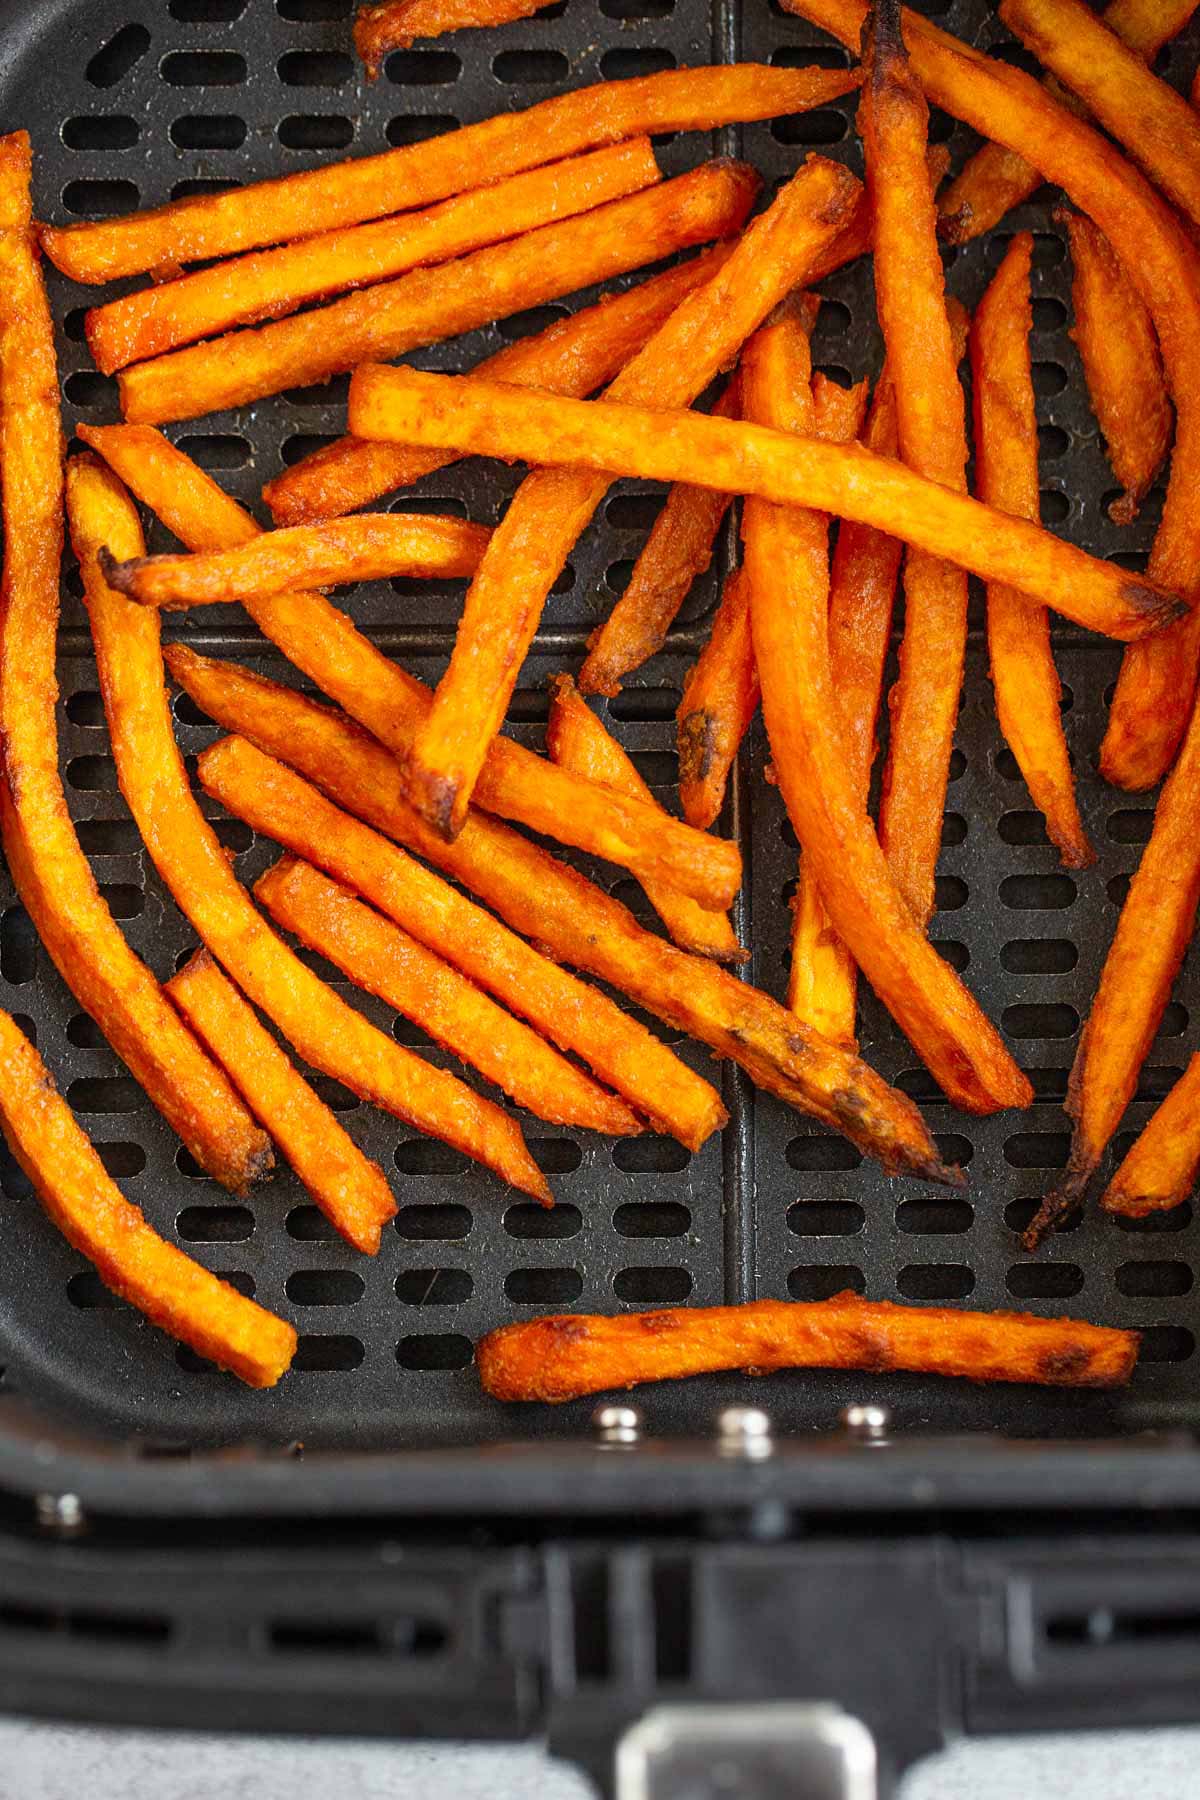 Cooked sweet potato fries in air fryer basket.